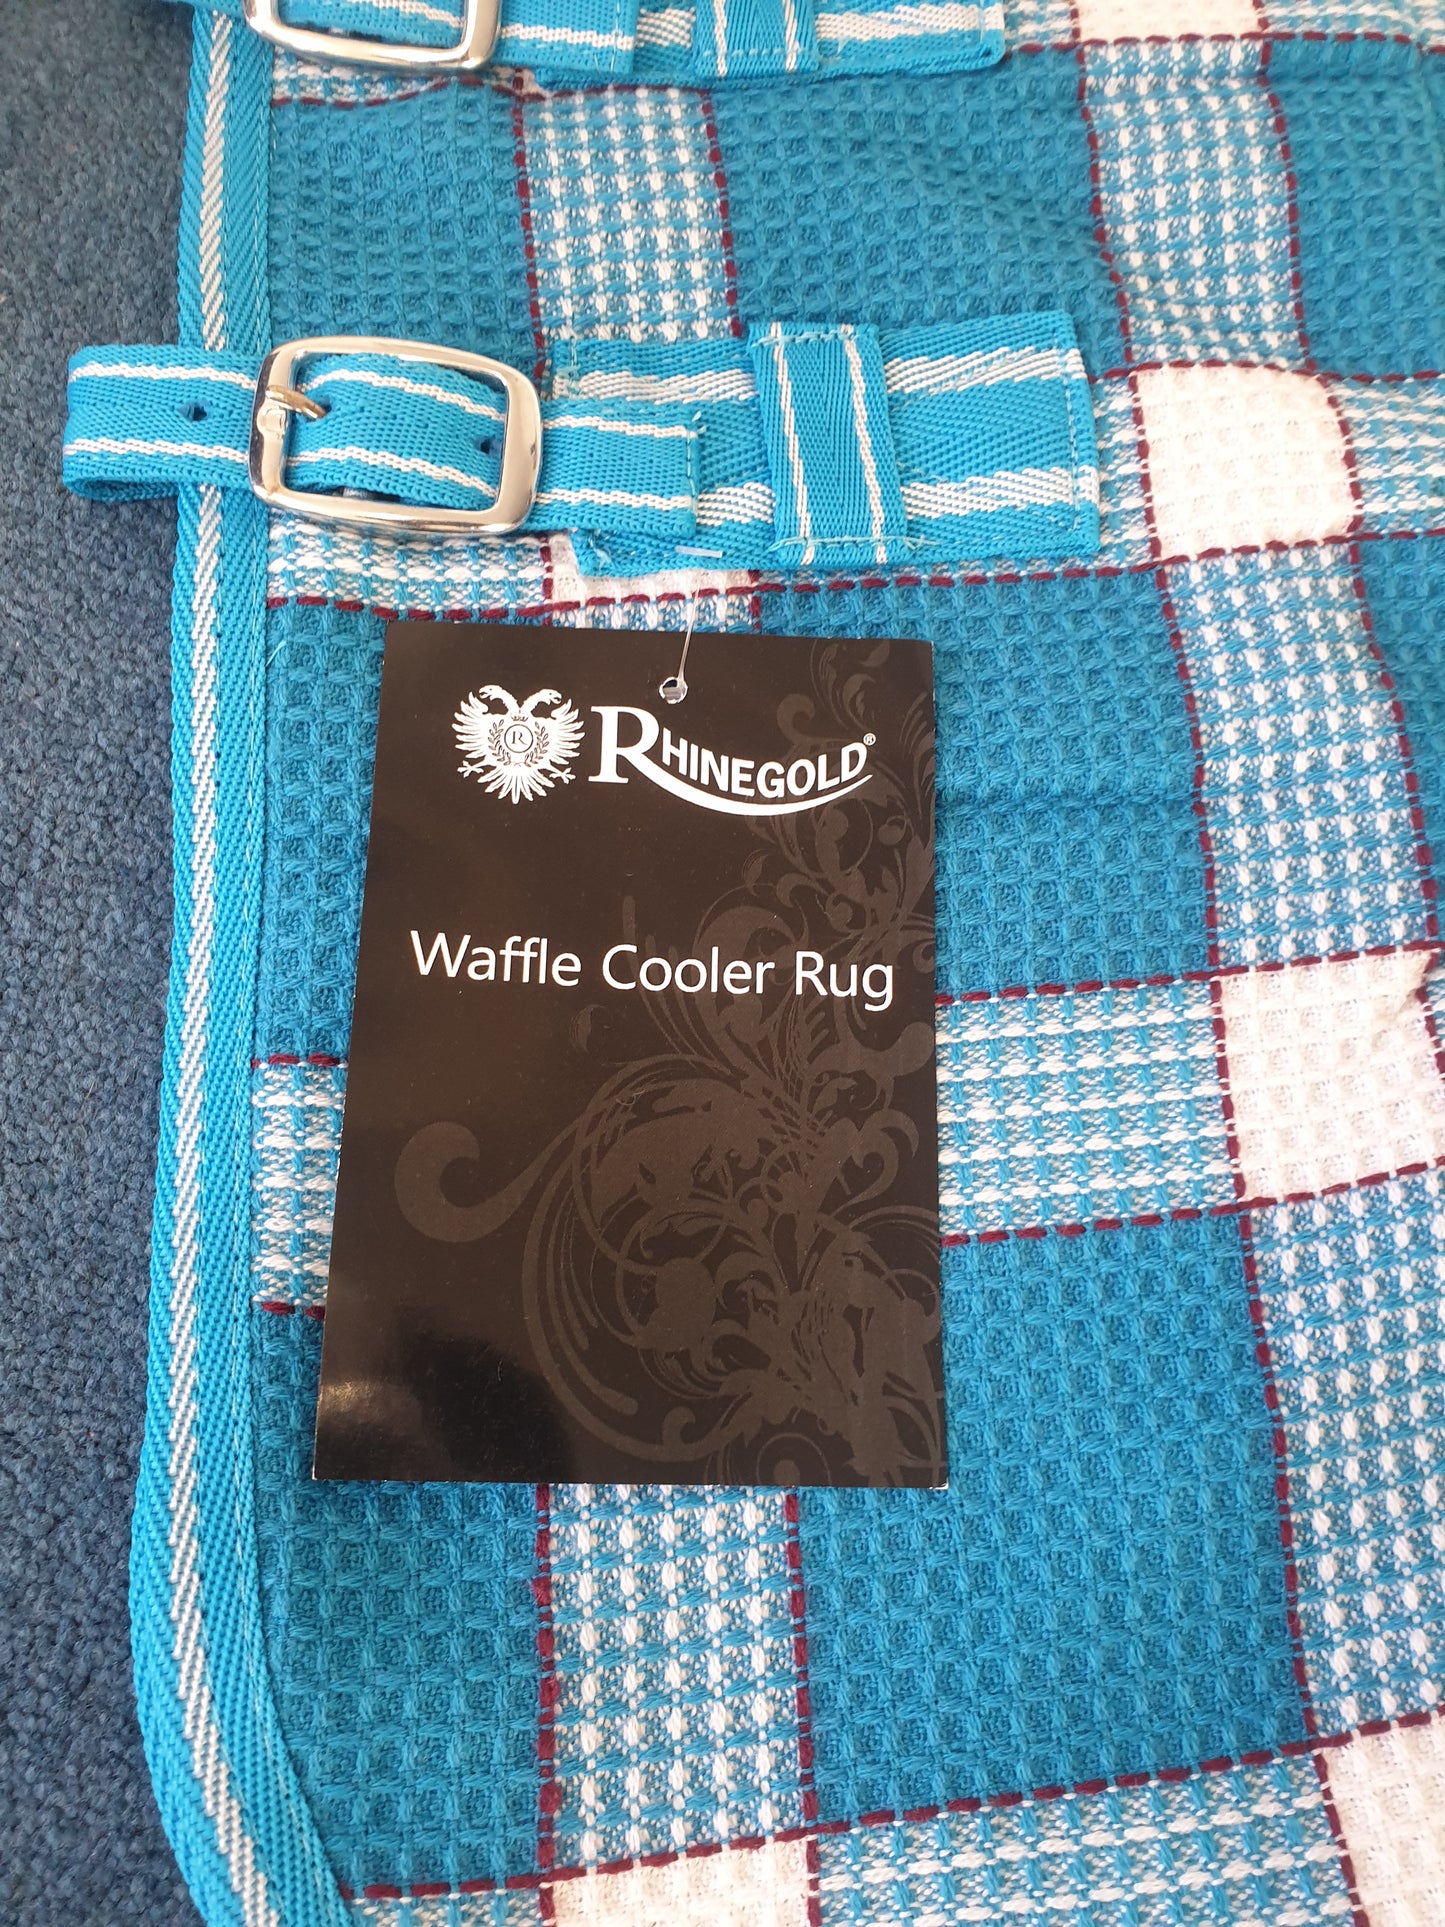 NEW rhinegold waffle cooler rugs, sizes 5'0 to 7'3, turquoise and white check FREE POSTAGE 🟢